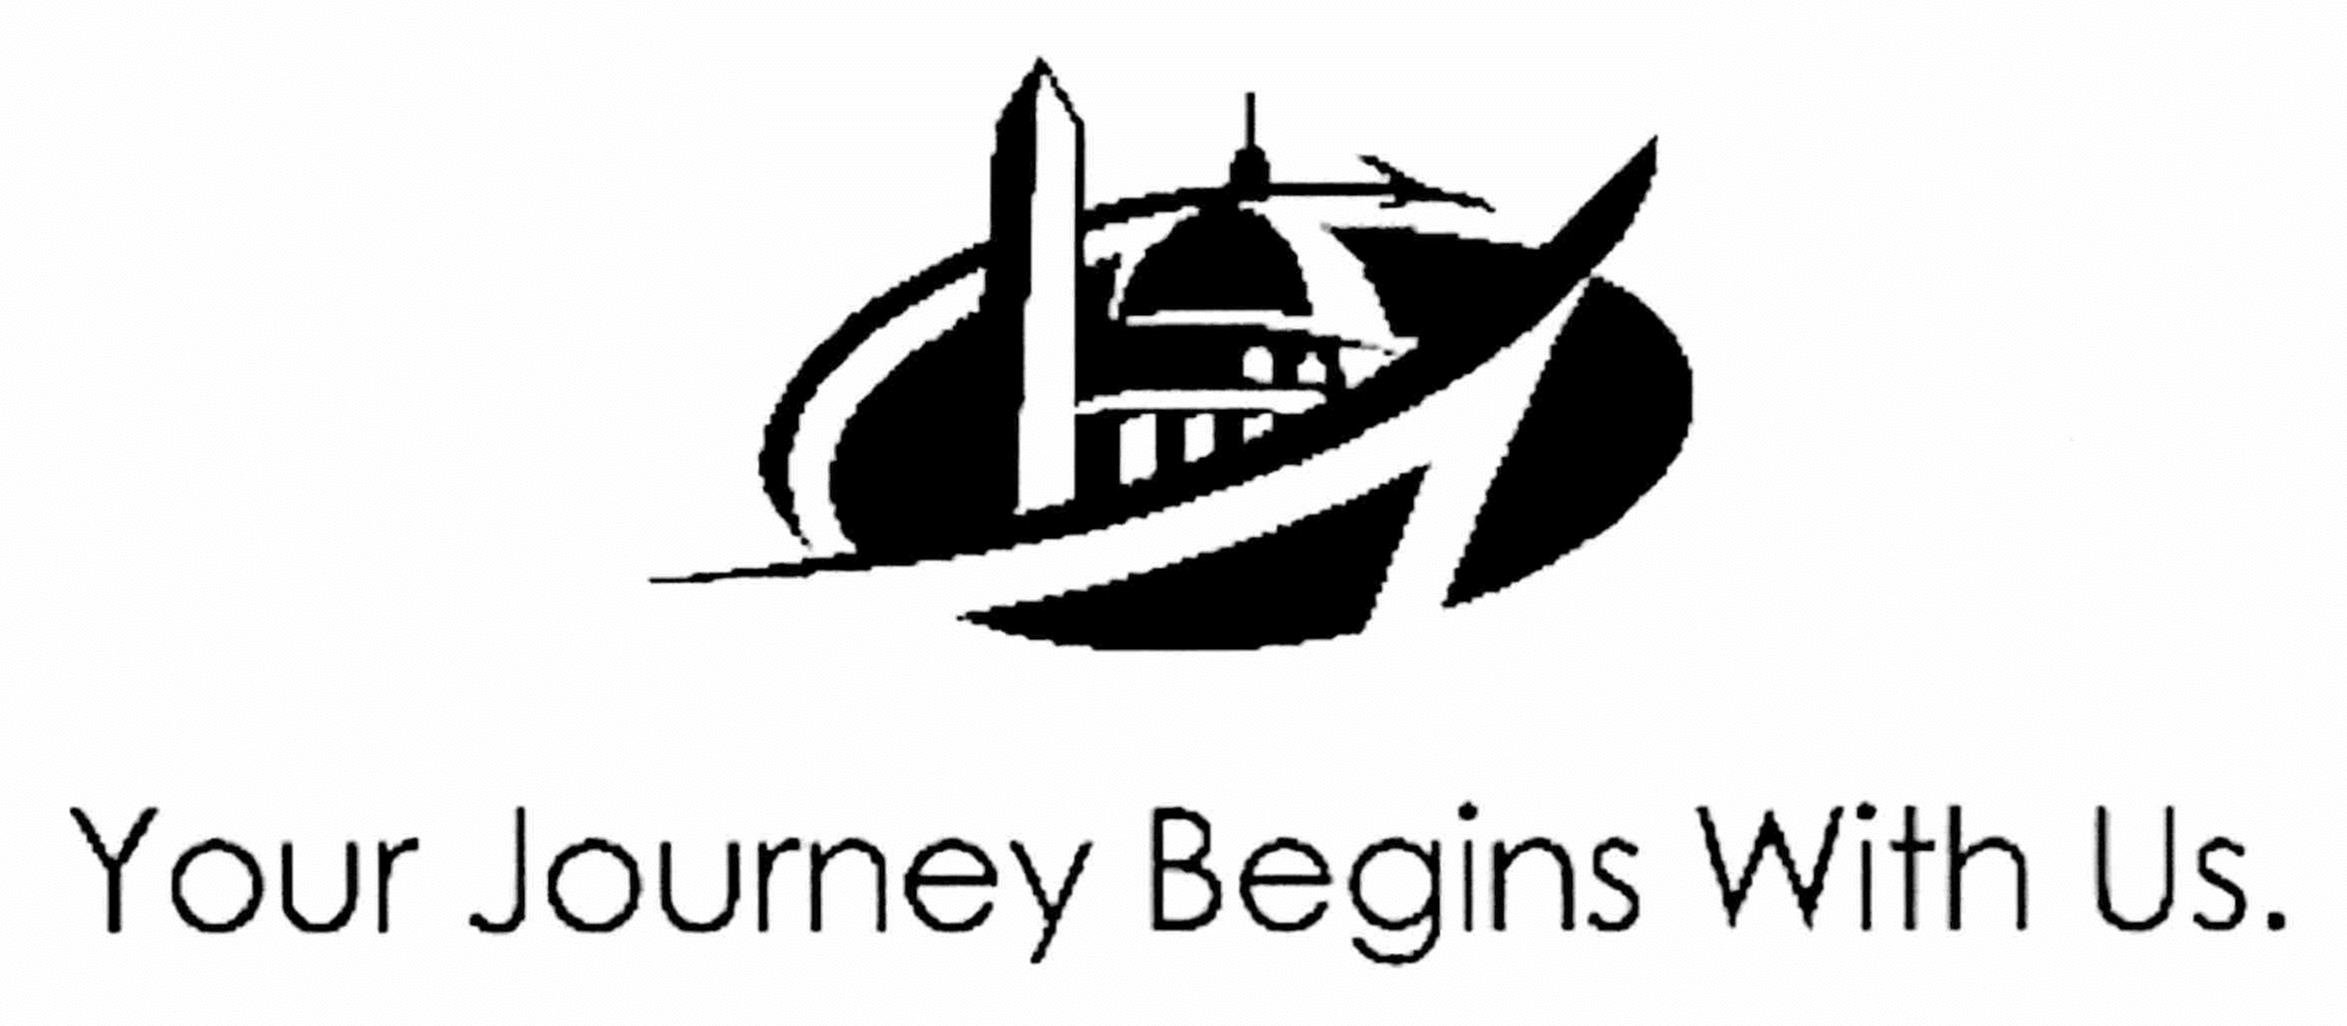  YOUR JOURNEY BEGINS WITH US